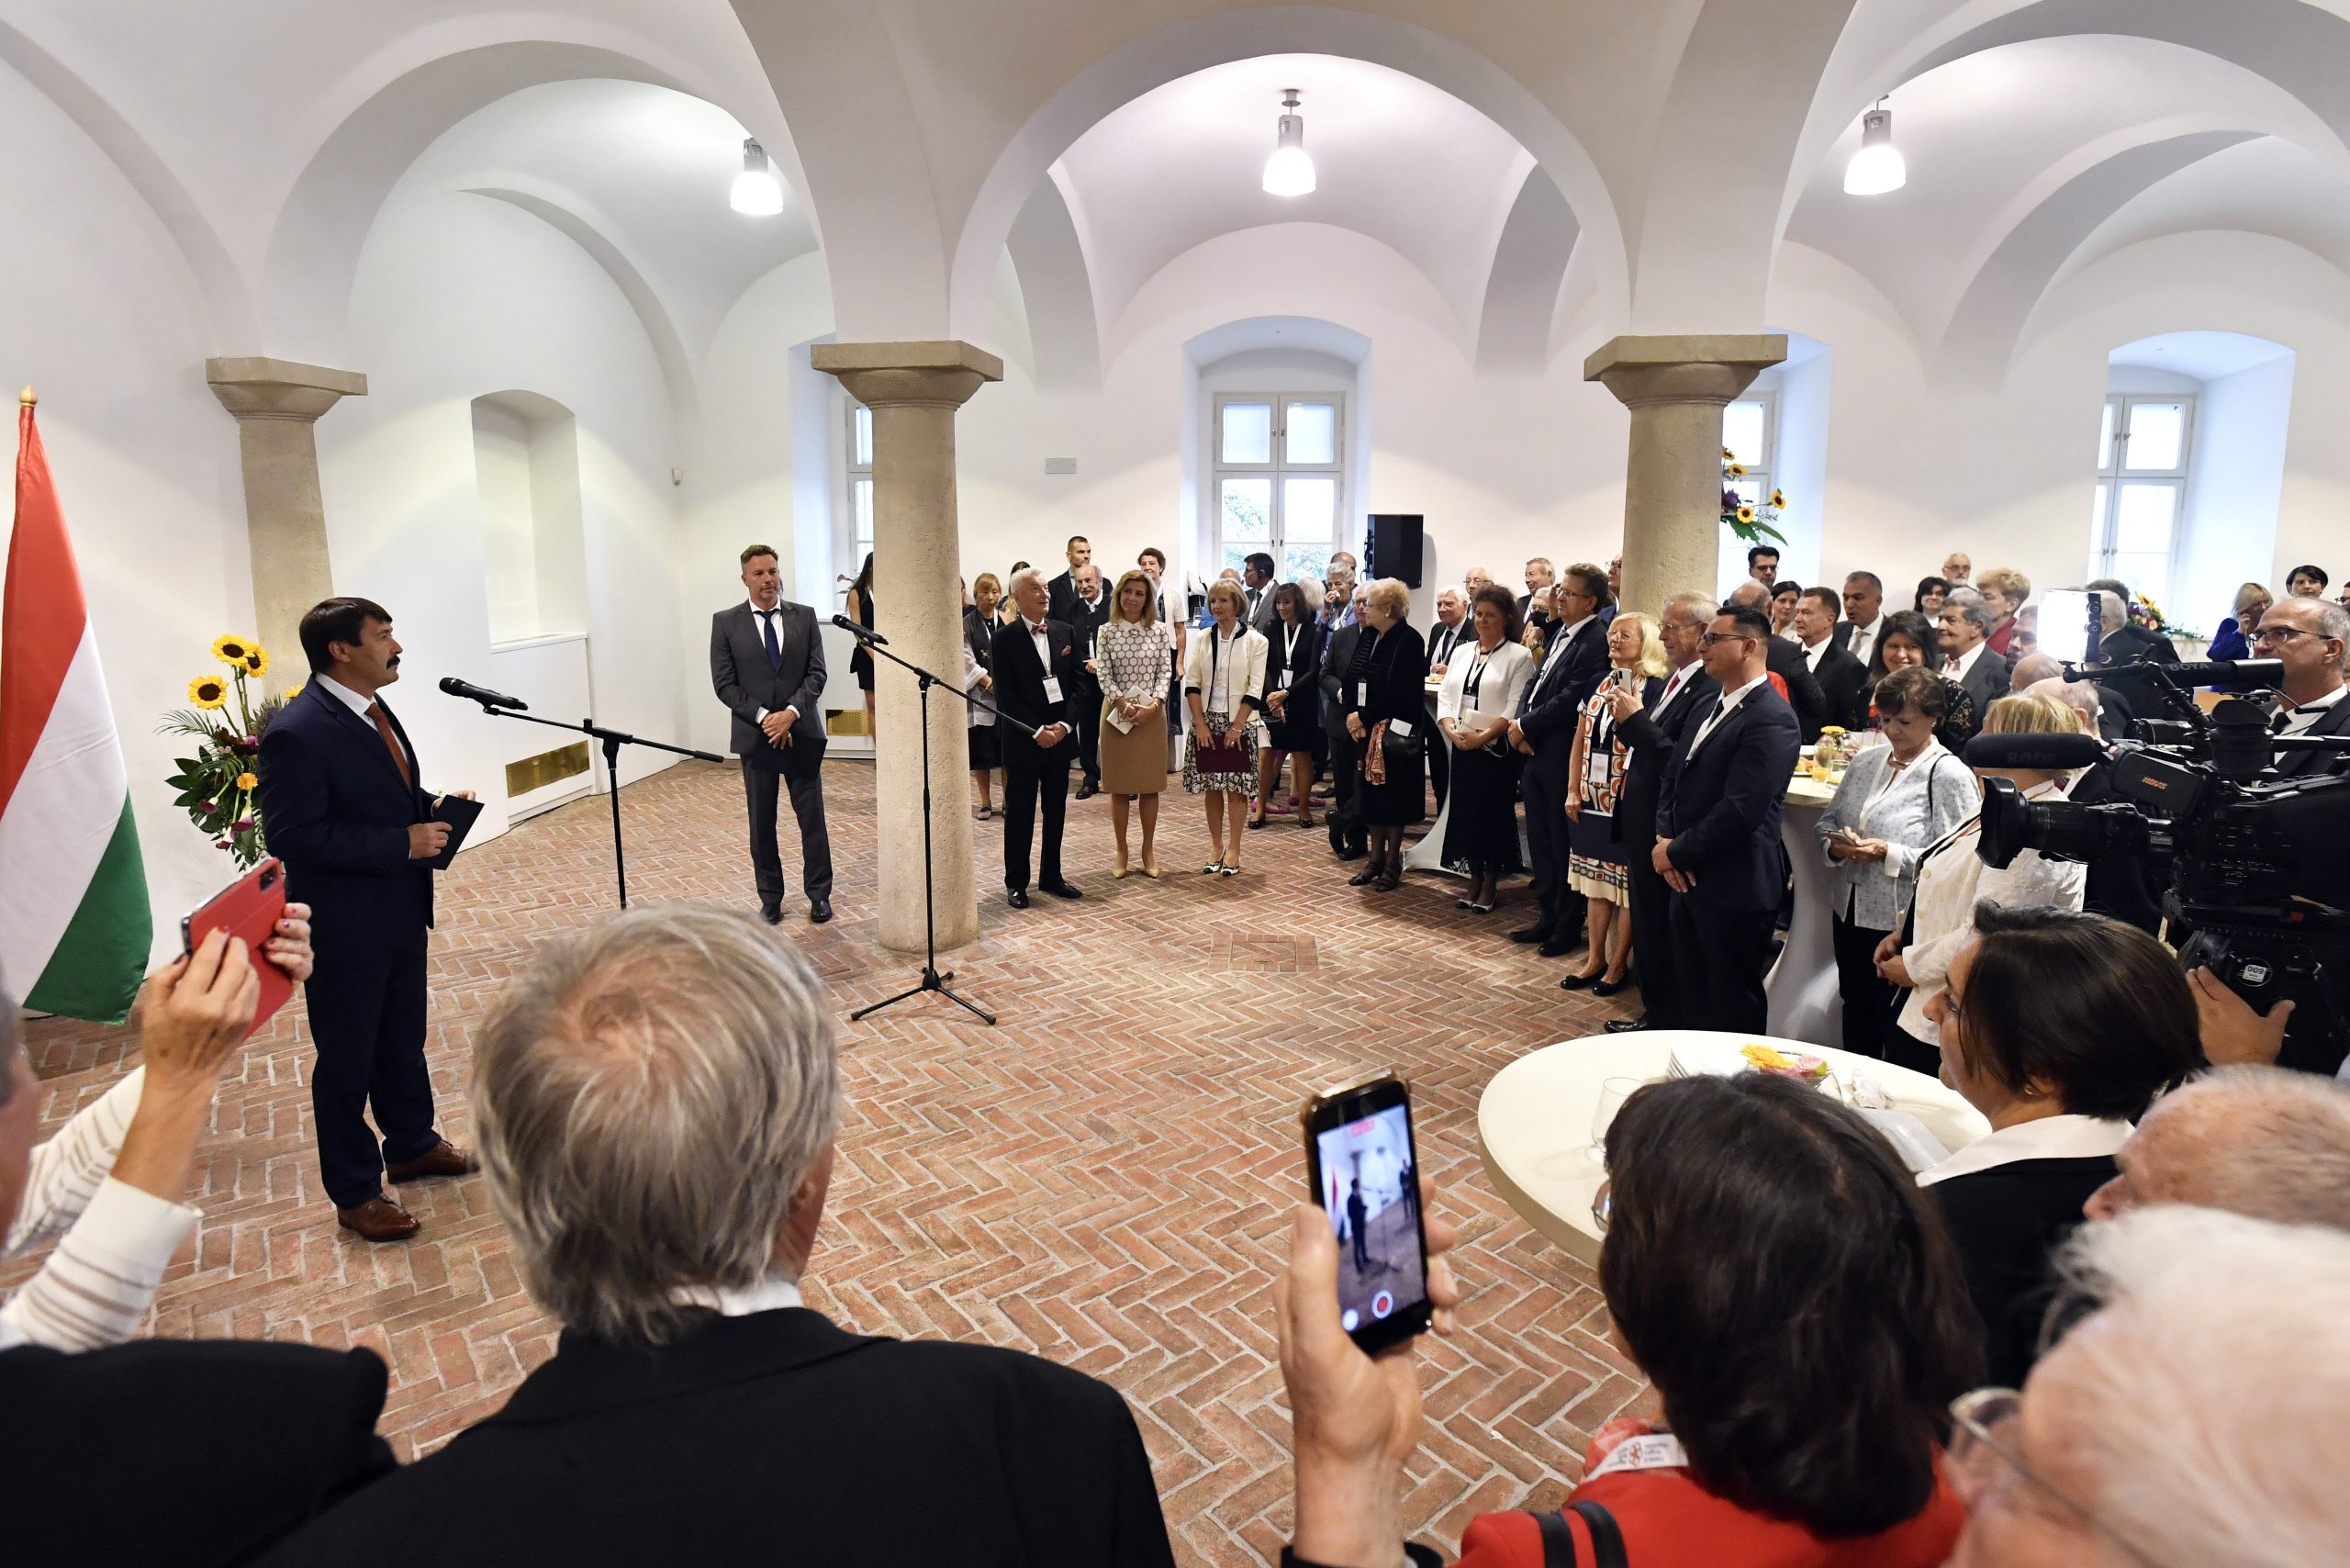 President Áder to 'Friends of Hungary' Delegates: "With reason, talent, will and faith we will not only subdue the epidemic but also succeed in recovery"